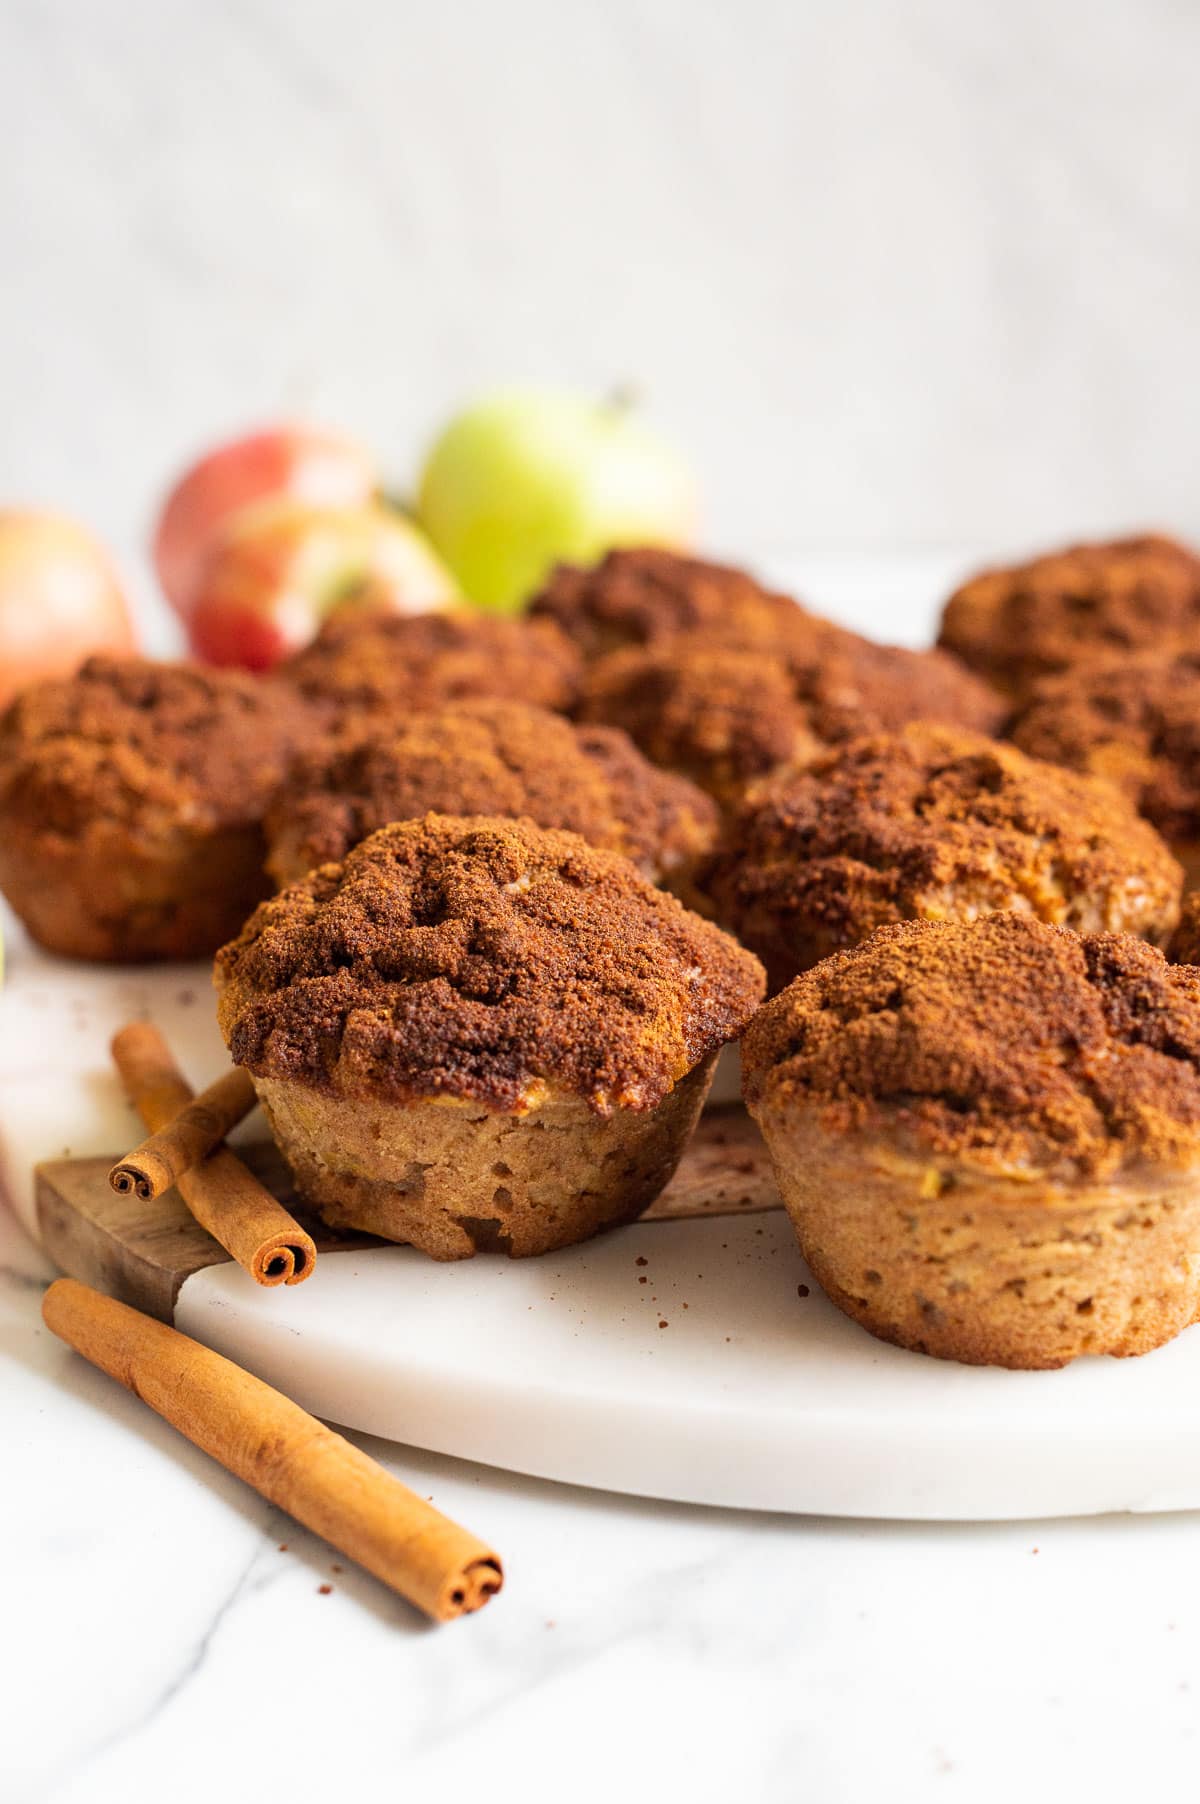 Apple cinnamon muffins on a platter. Cinnamon sticks and apples in the background.